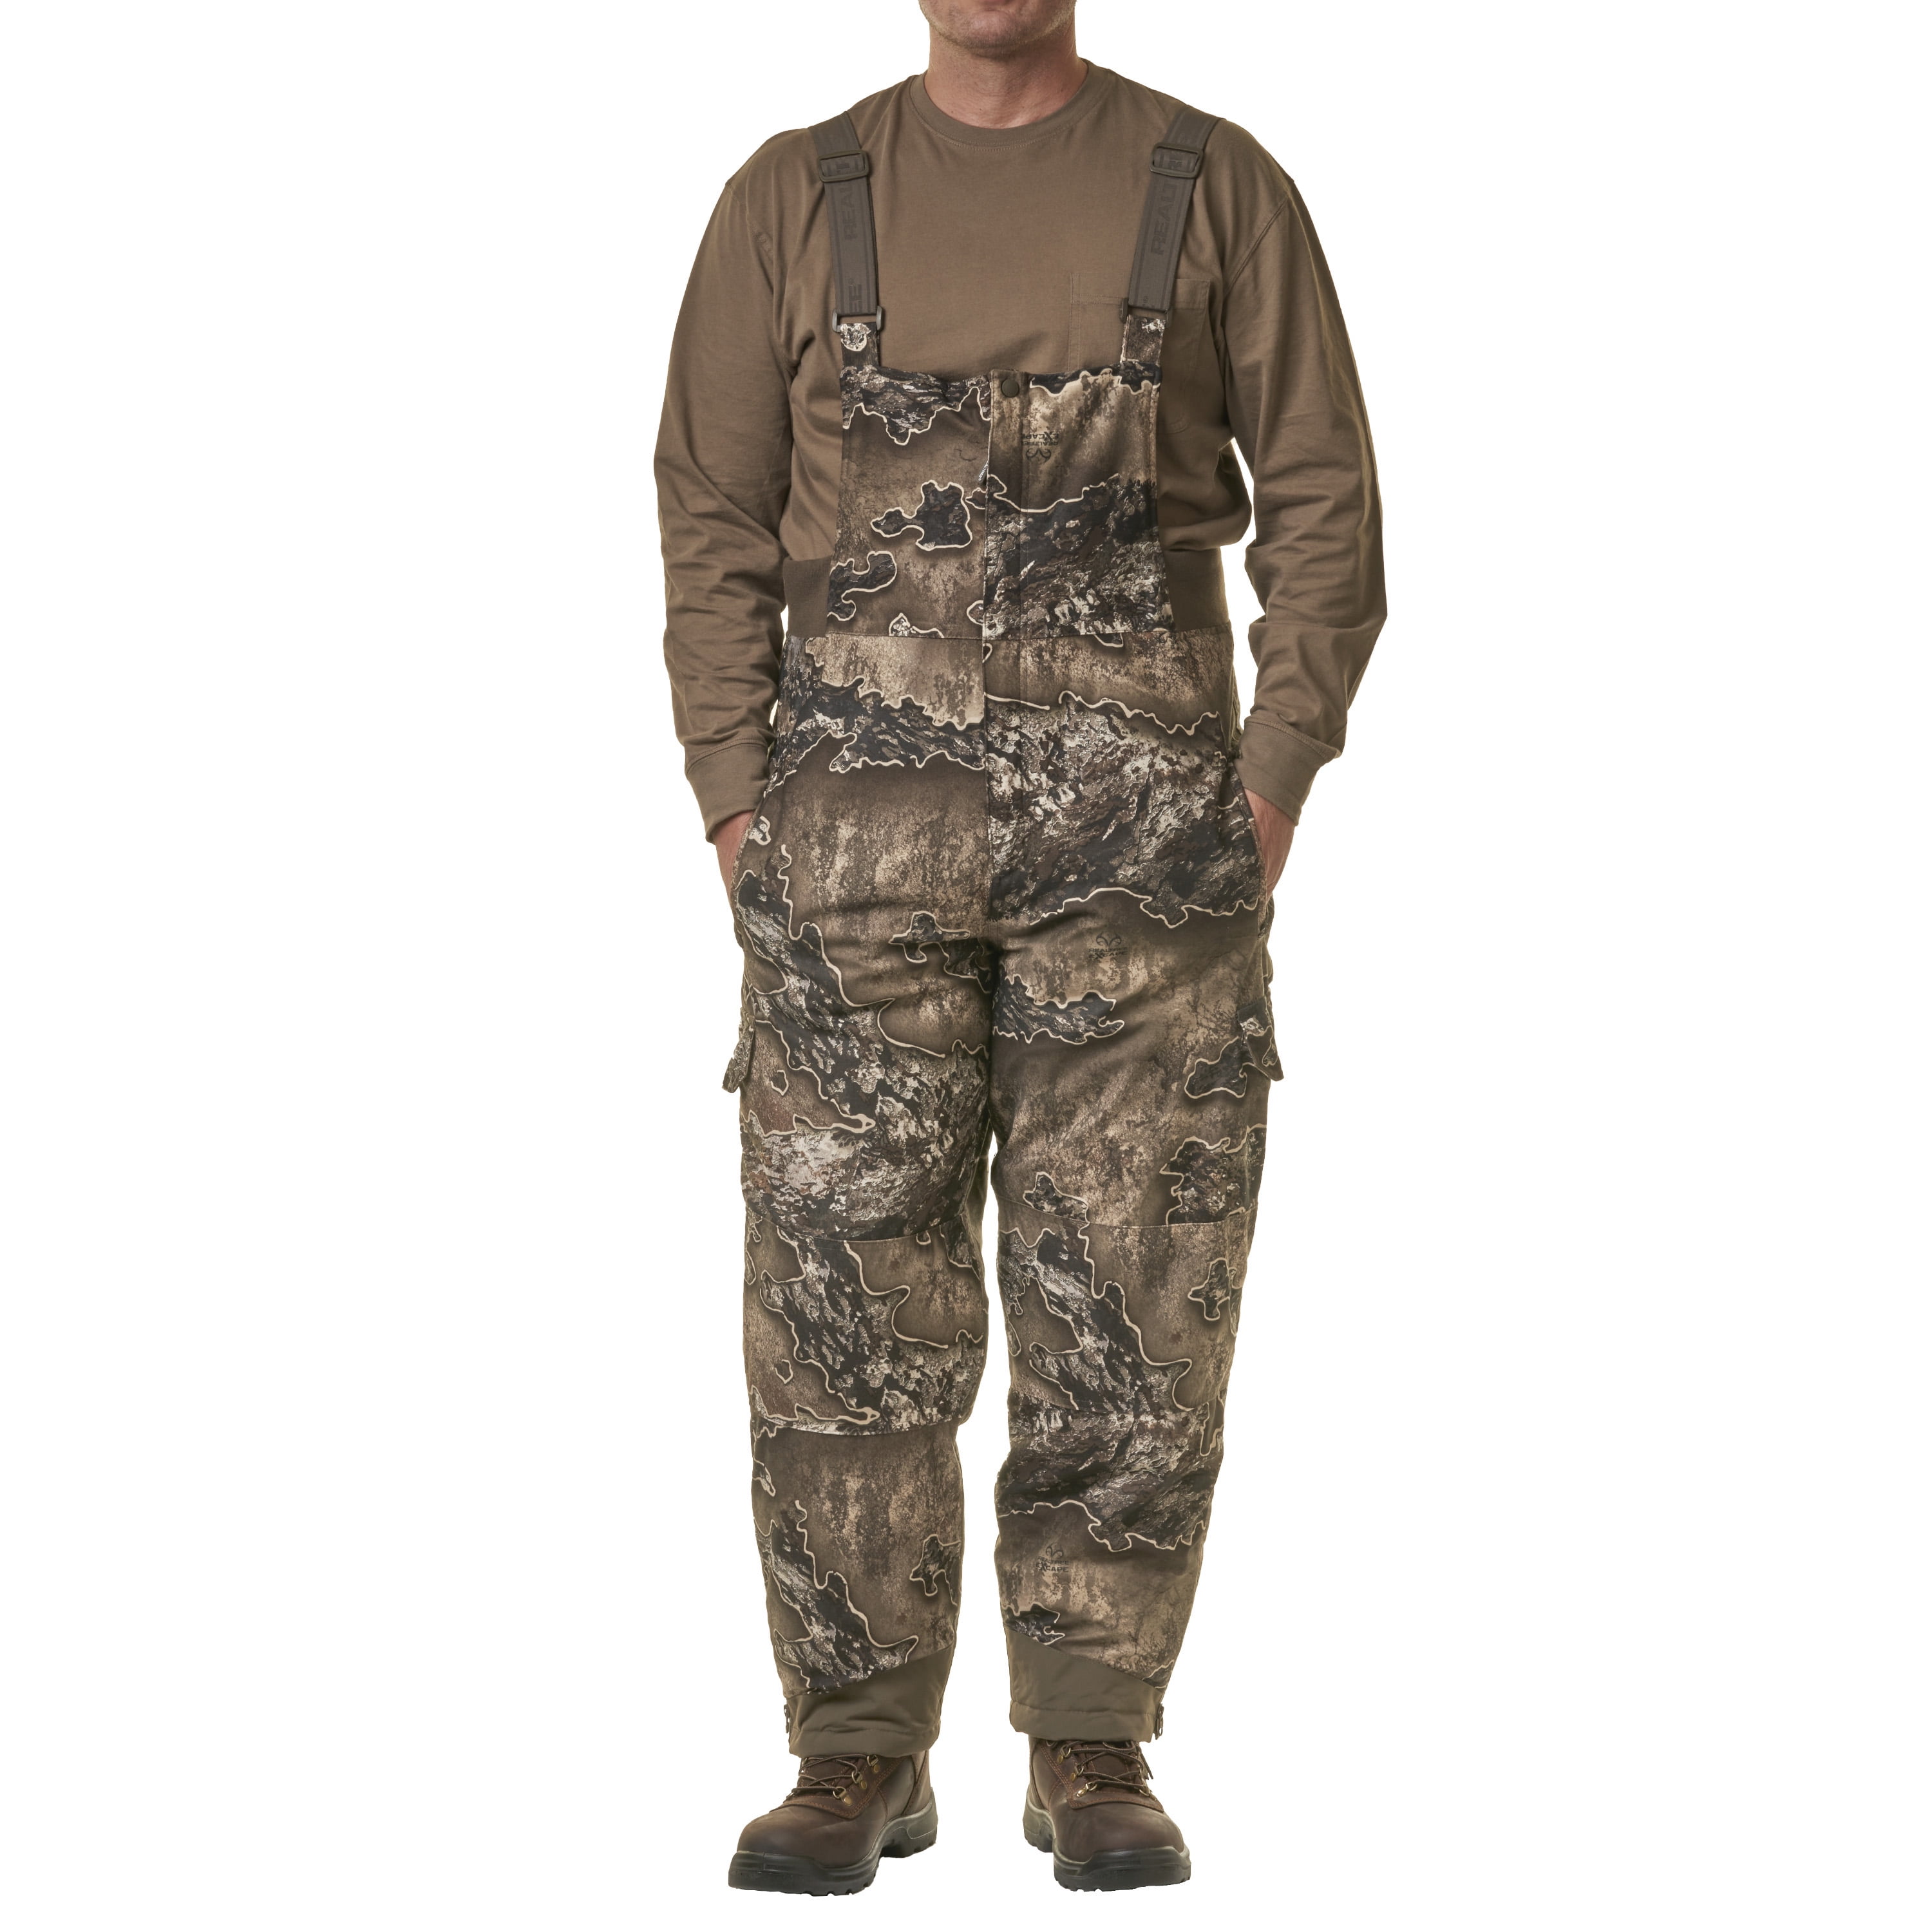 Realtree Excape Men's Insulated Hunting Bib, up to Size 3XL - Walmart.com